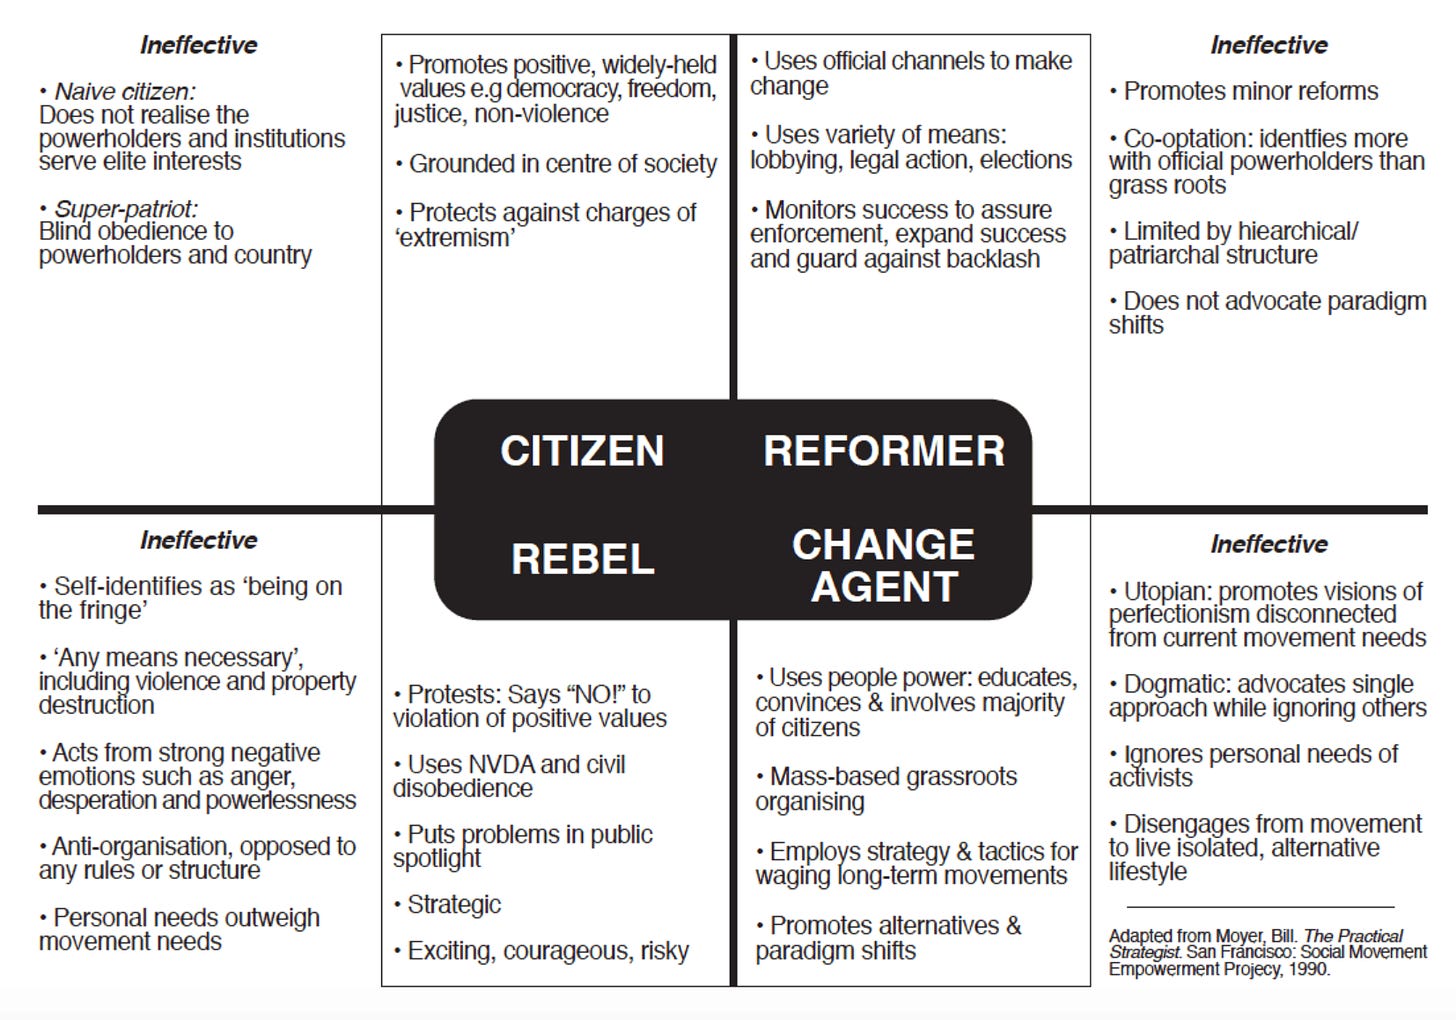 a 4 quadrant box labeled Citizen, Reformer, Change Agent, and Rebel — each has definitions and "ineffective" characteristics